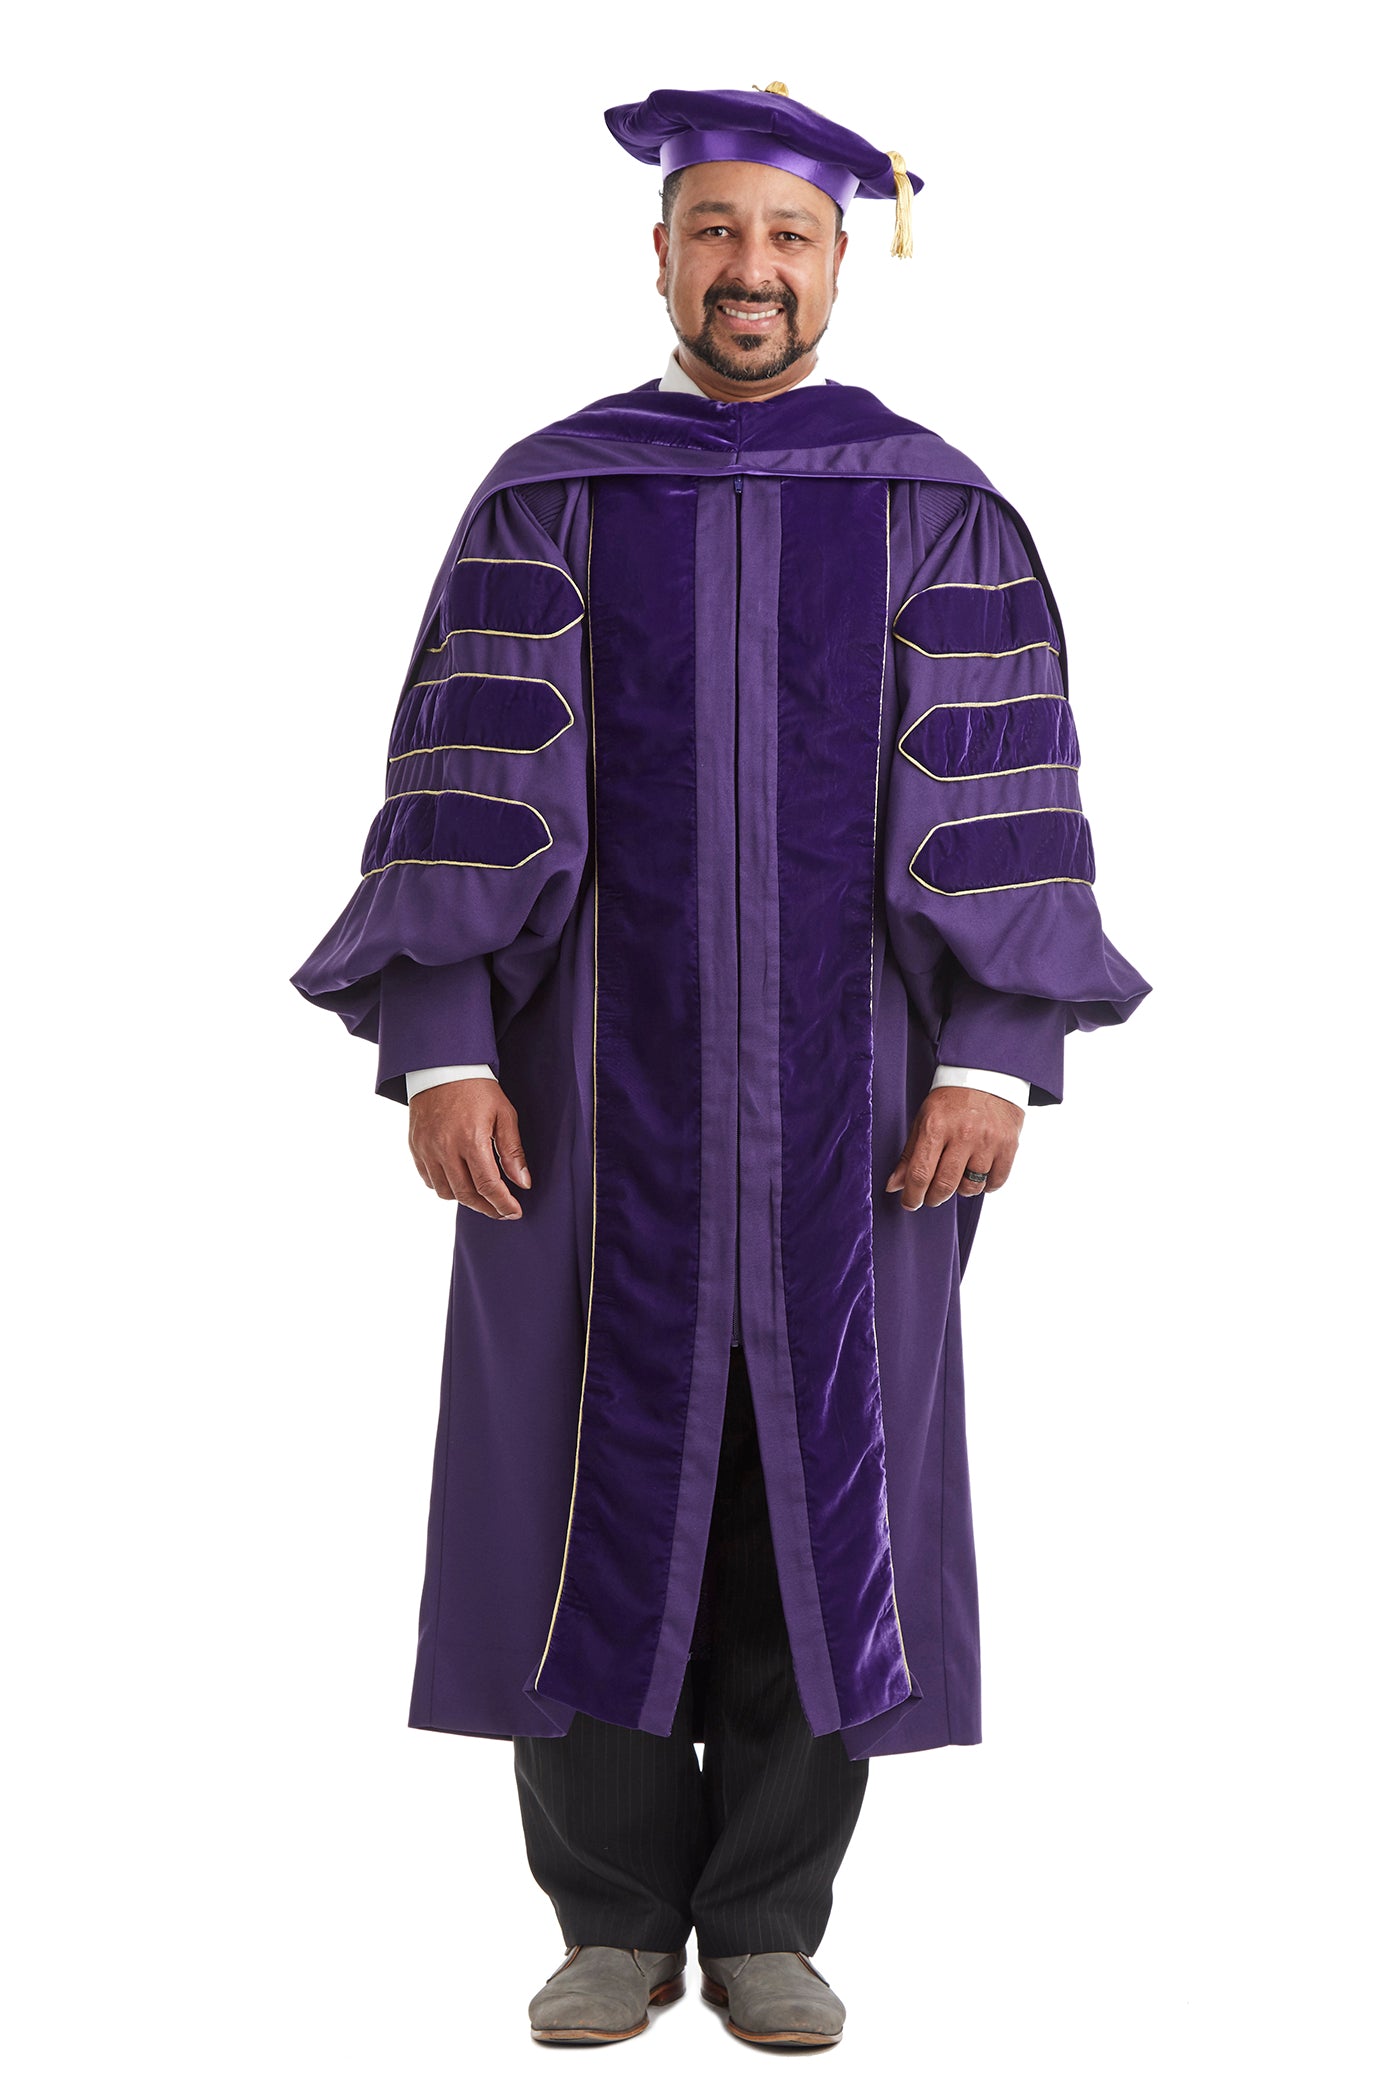 Deluxe Doctoral Graduation Gown with Gold Piping and Doctoral Tam Pack –  MyGradDay